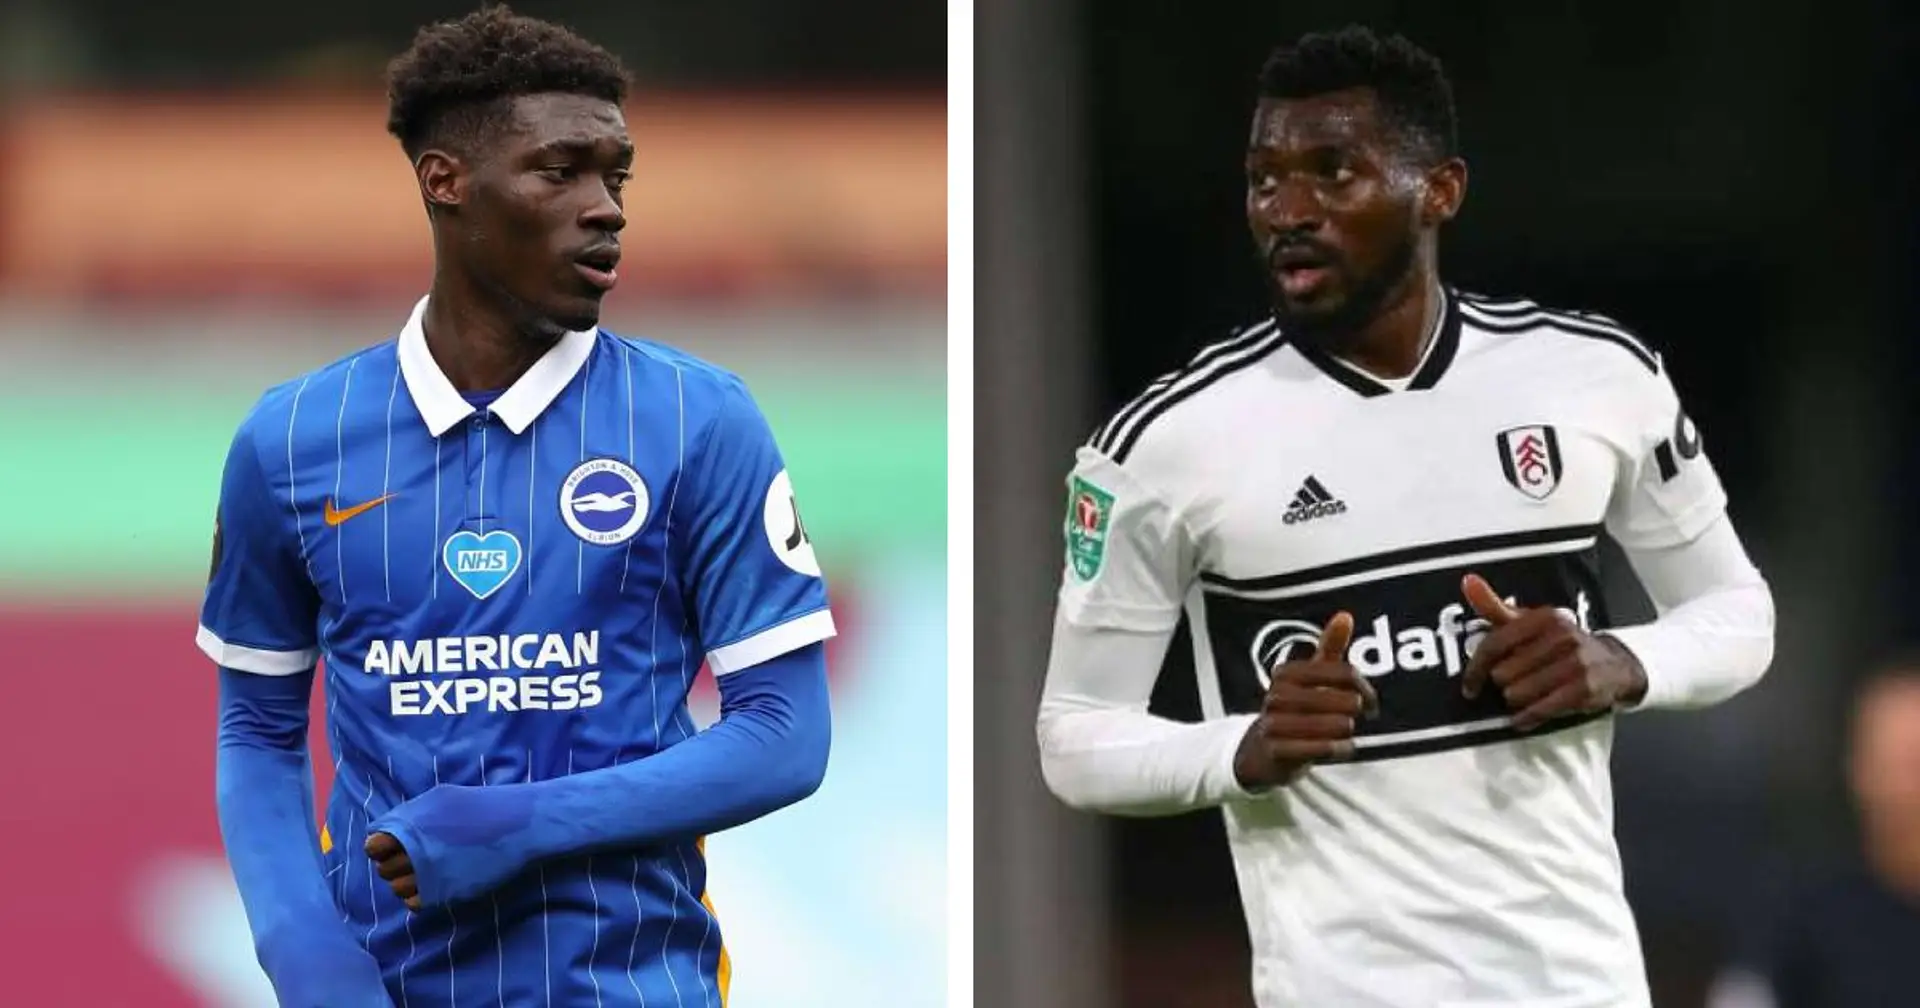 'Anguissa is a fiercer presence to deal with': fan compares Fulham man with Bissouma, explains who'd fit Arsenal better